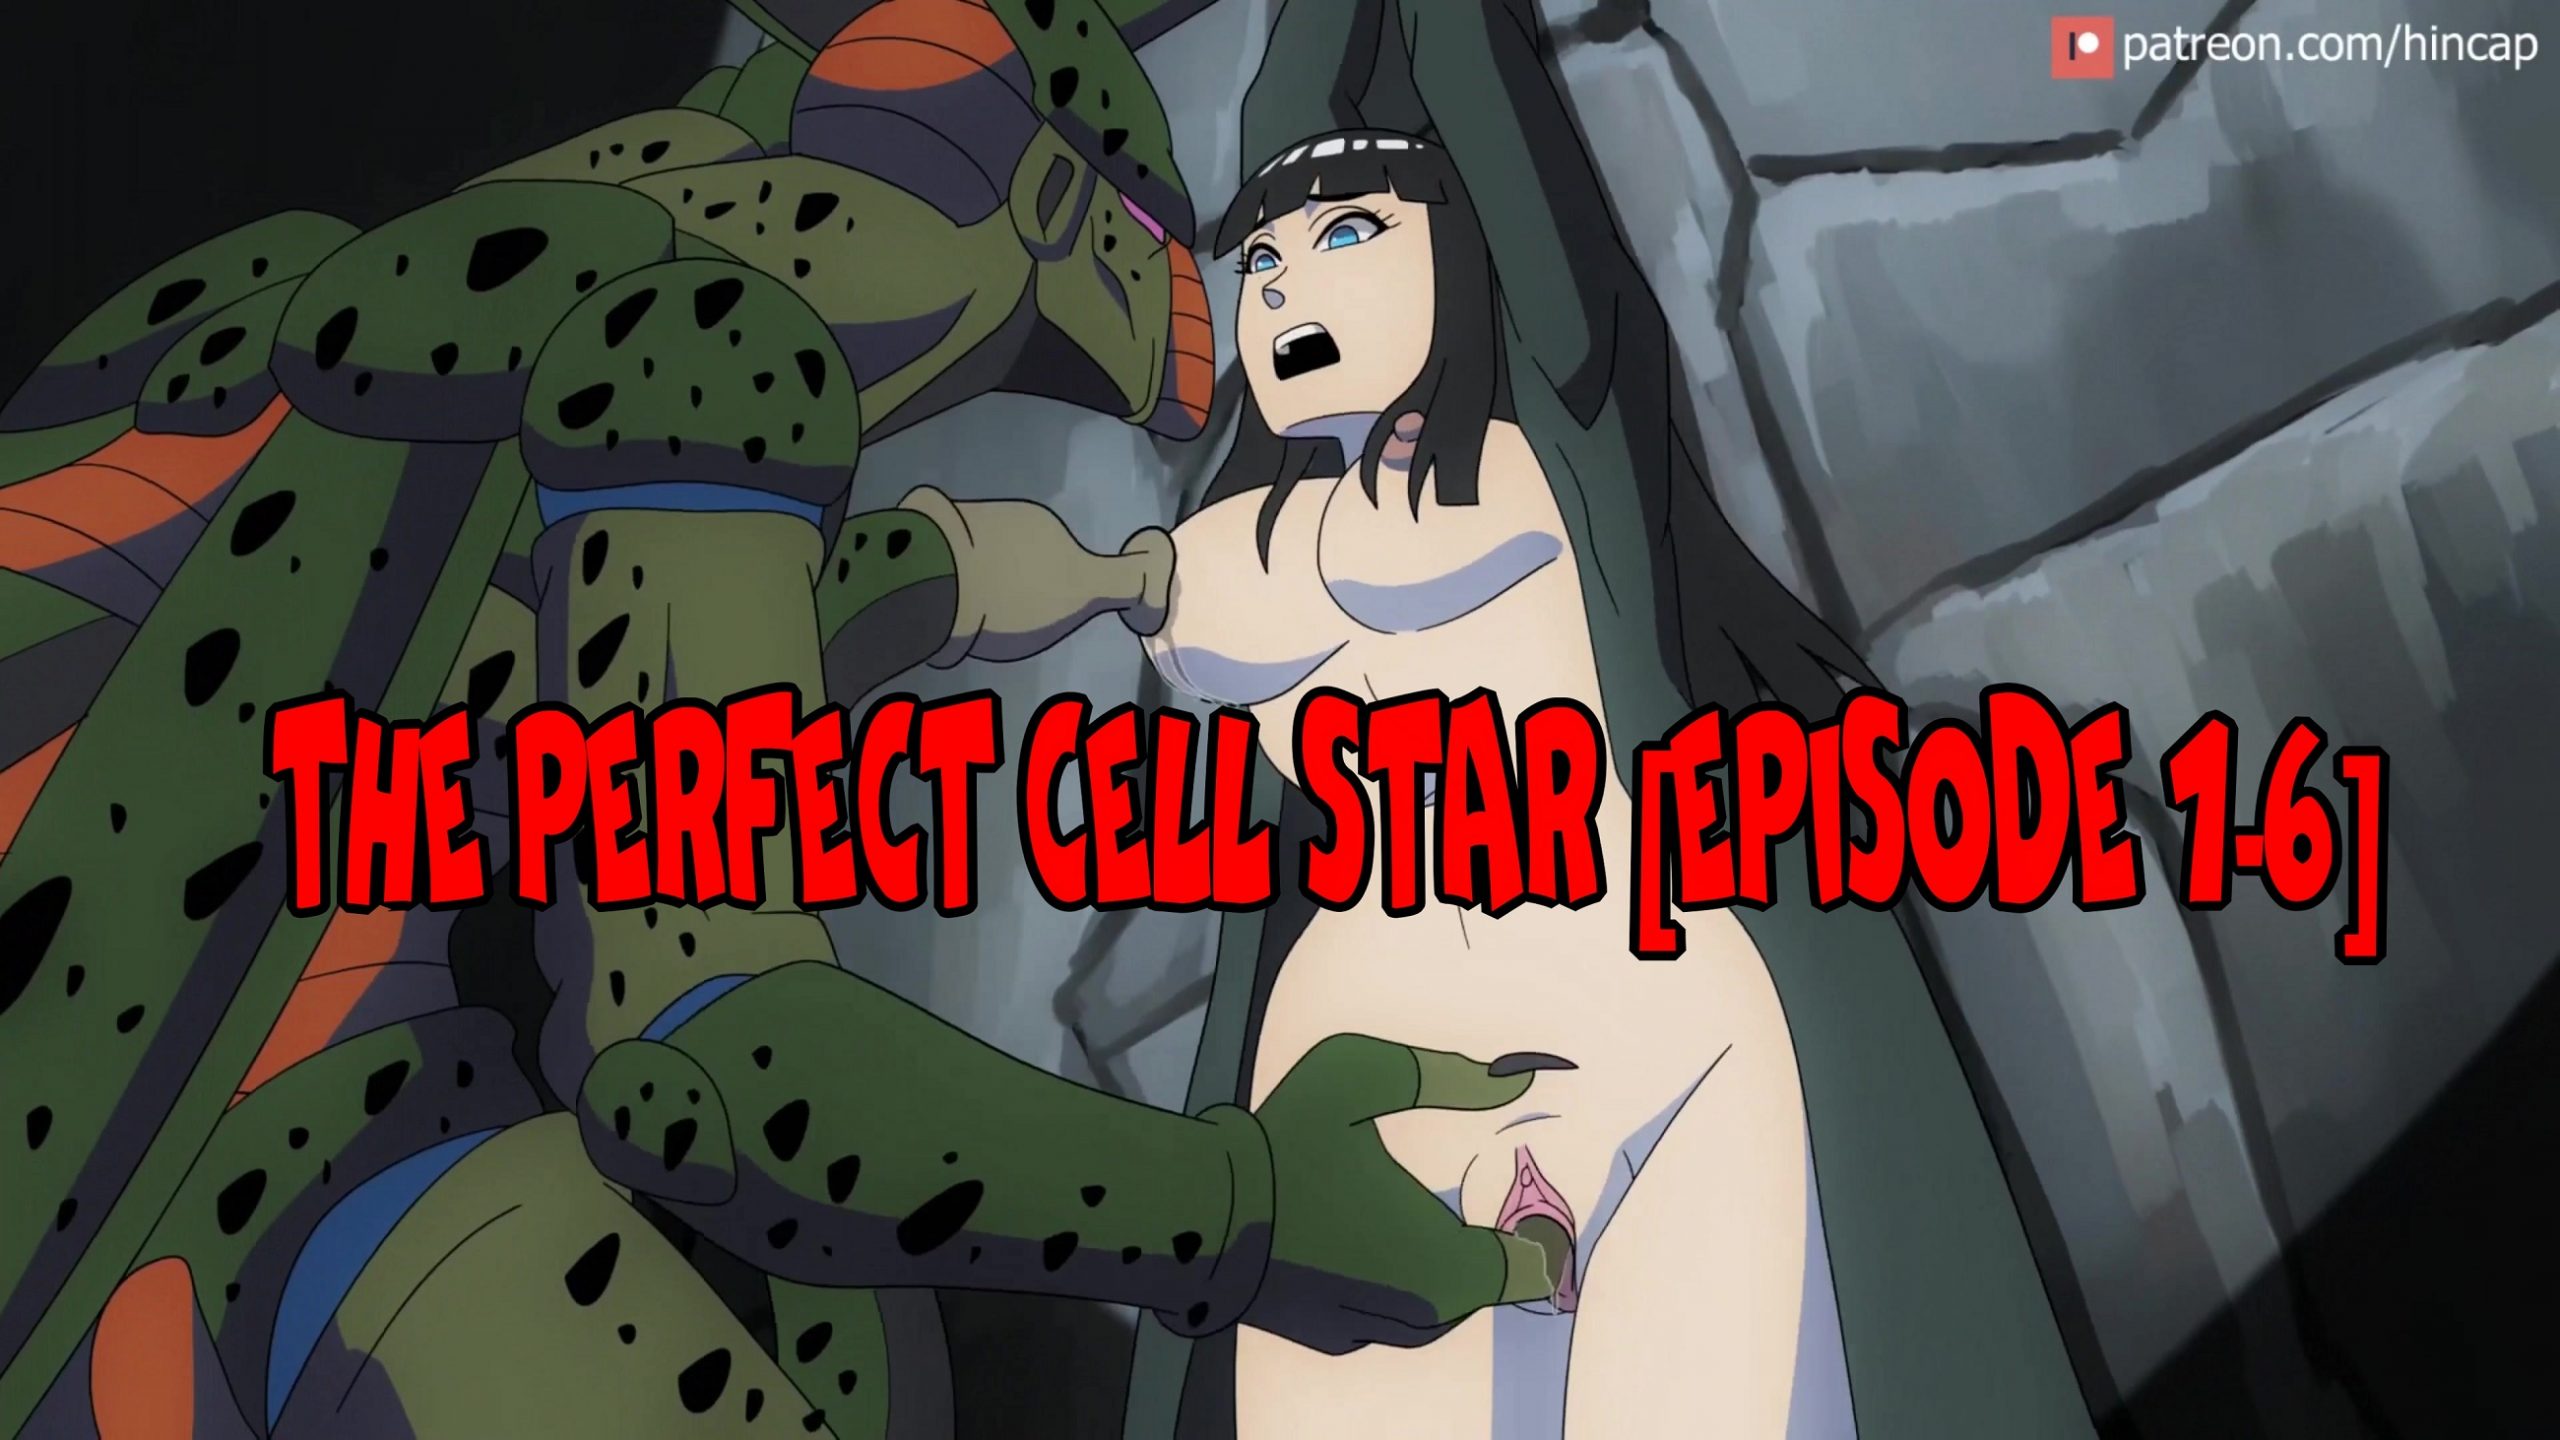 The perfect cell part 6 hincap